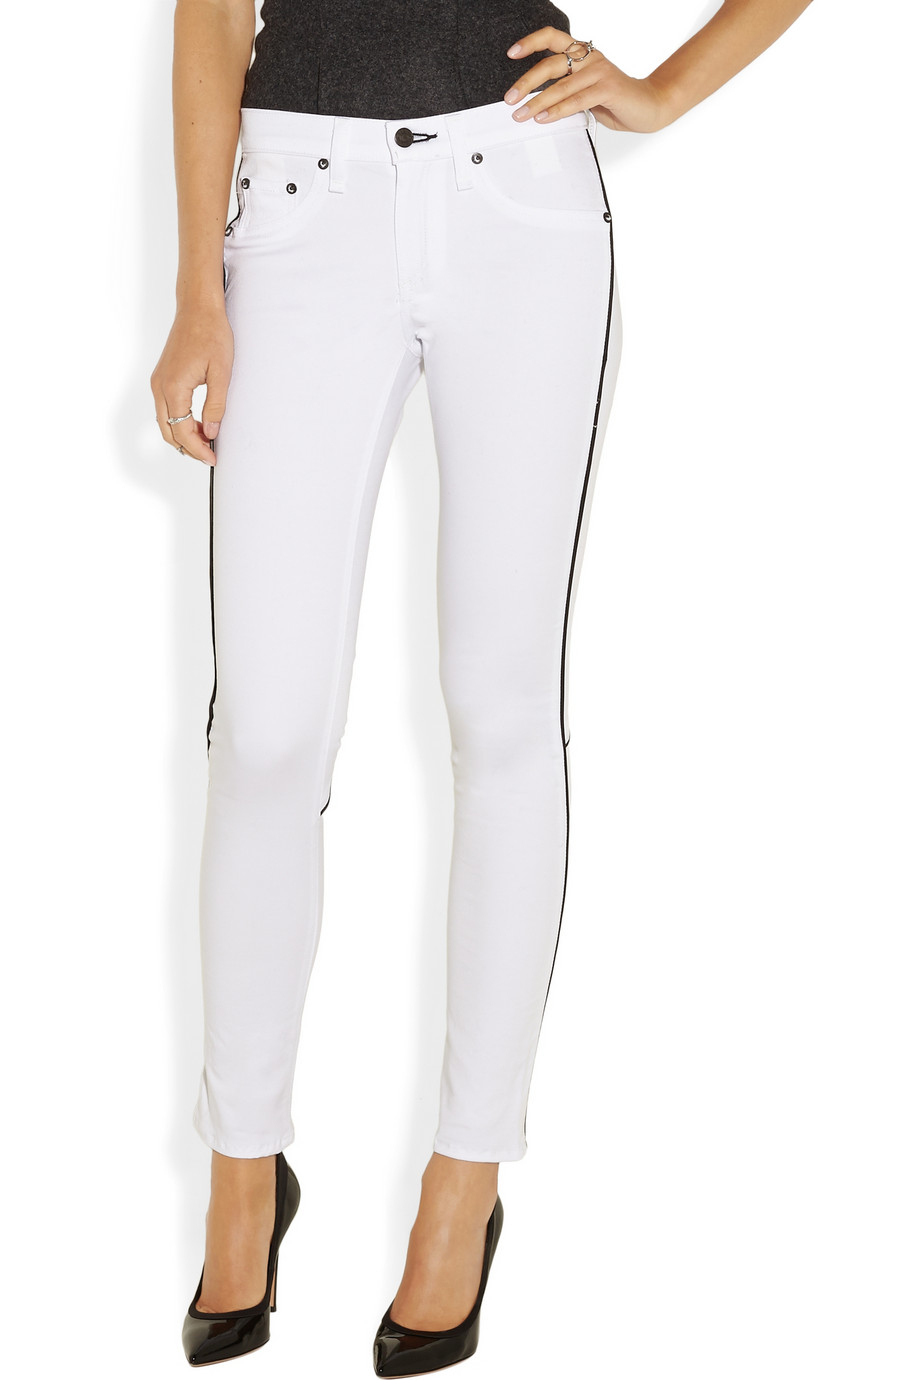 Lyst - Rag & bone The Bomber Leathertrimmed Midrise Skinny Jeans in White